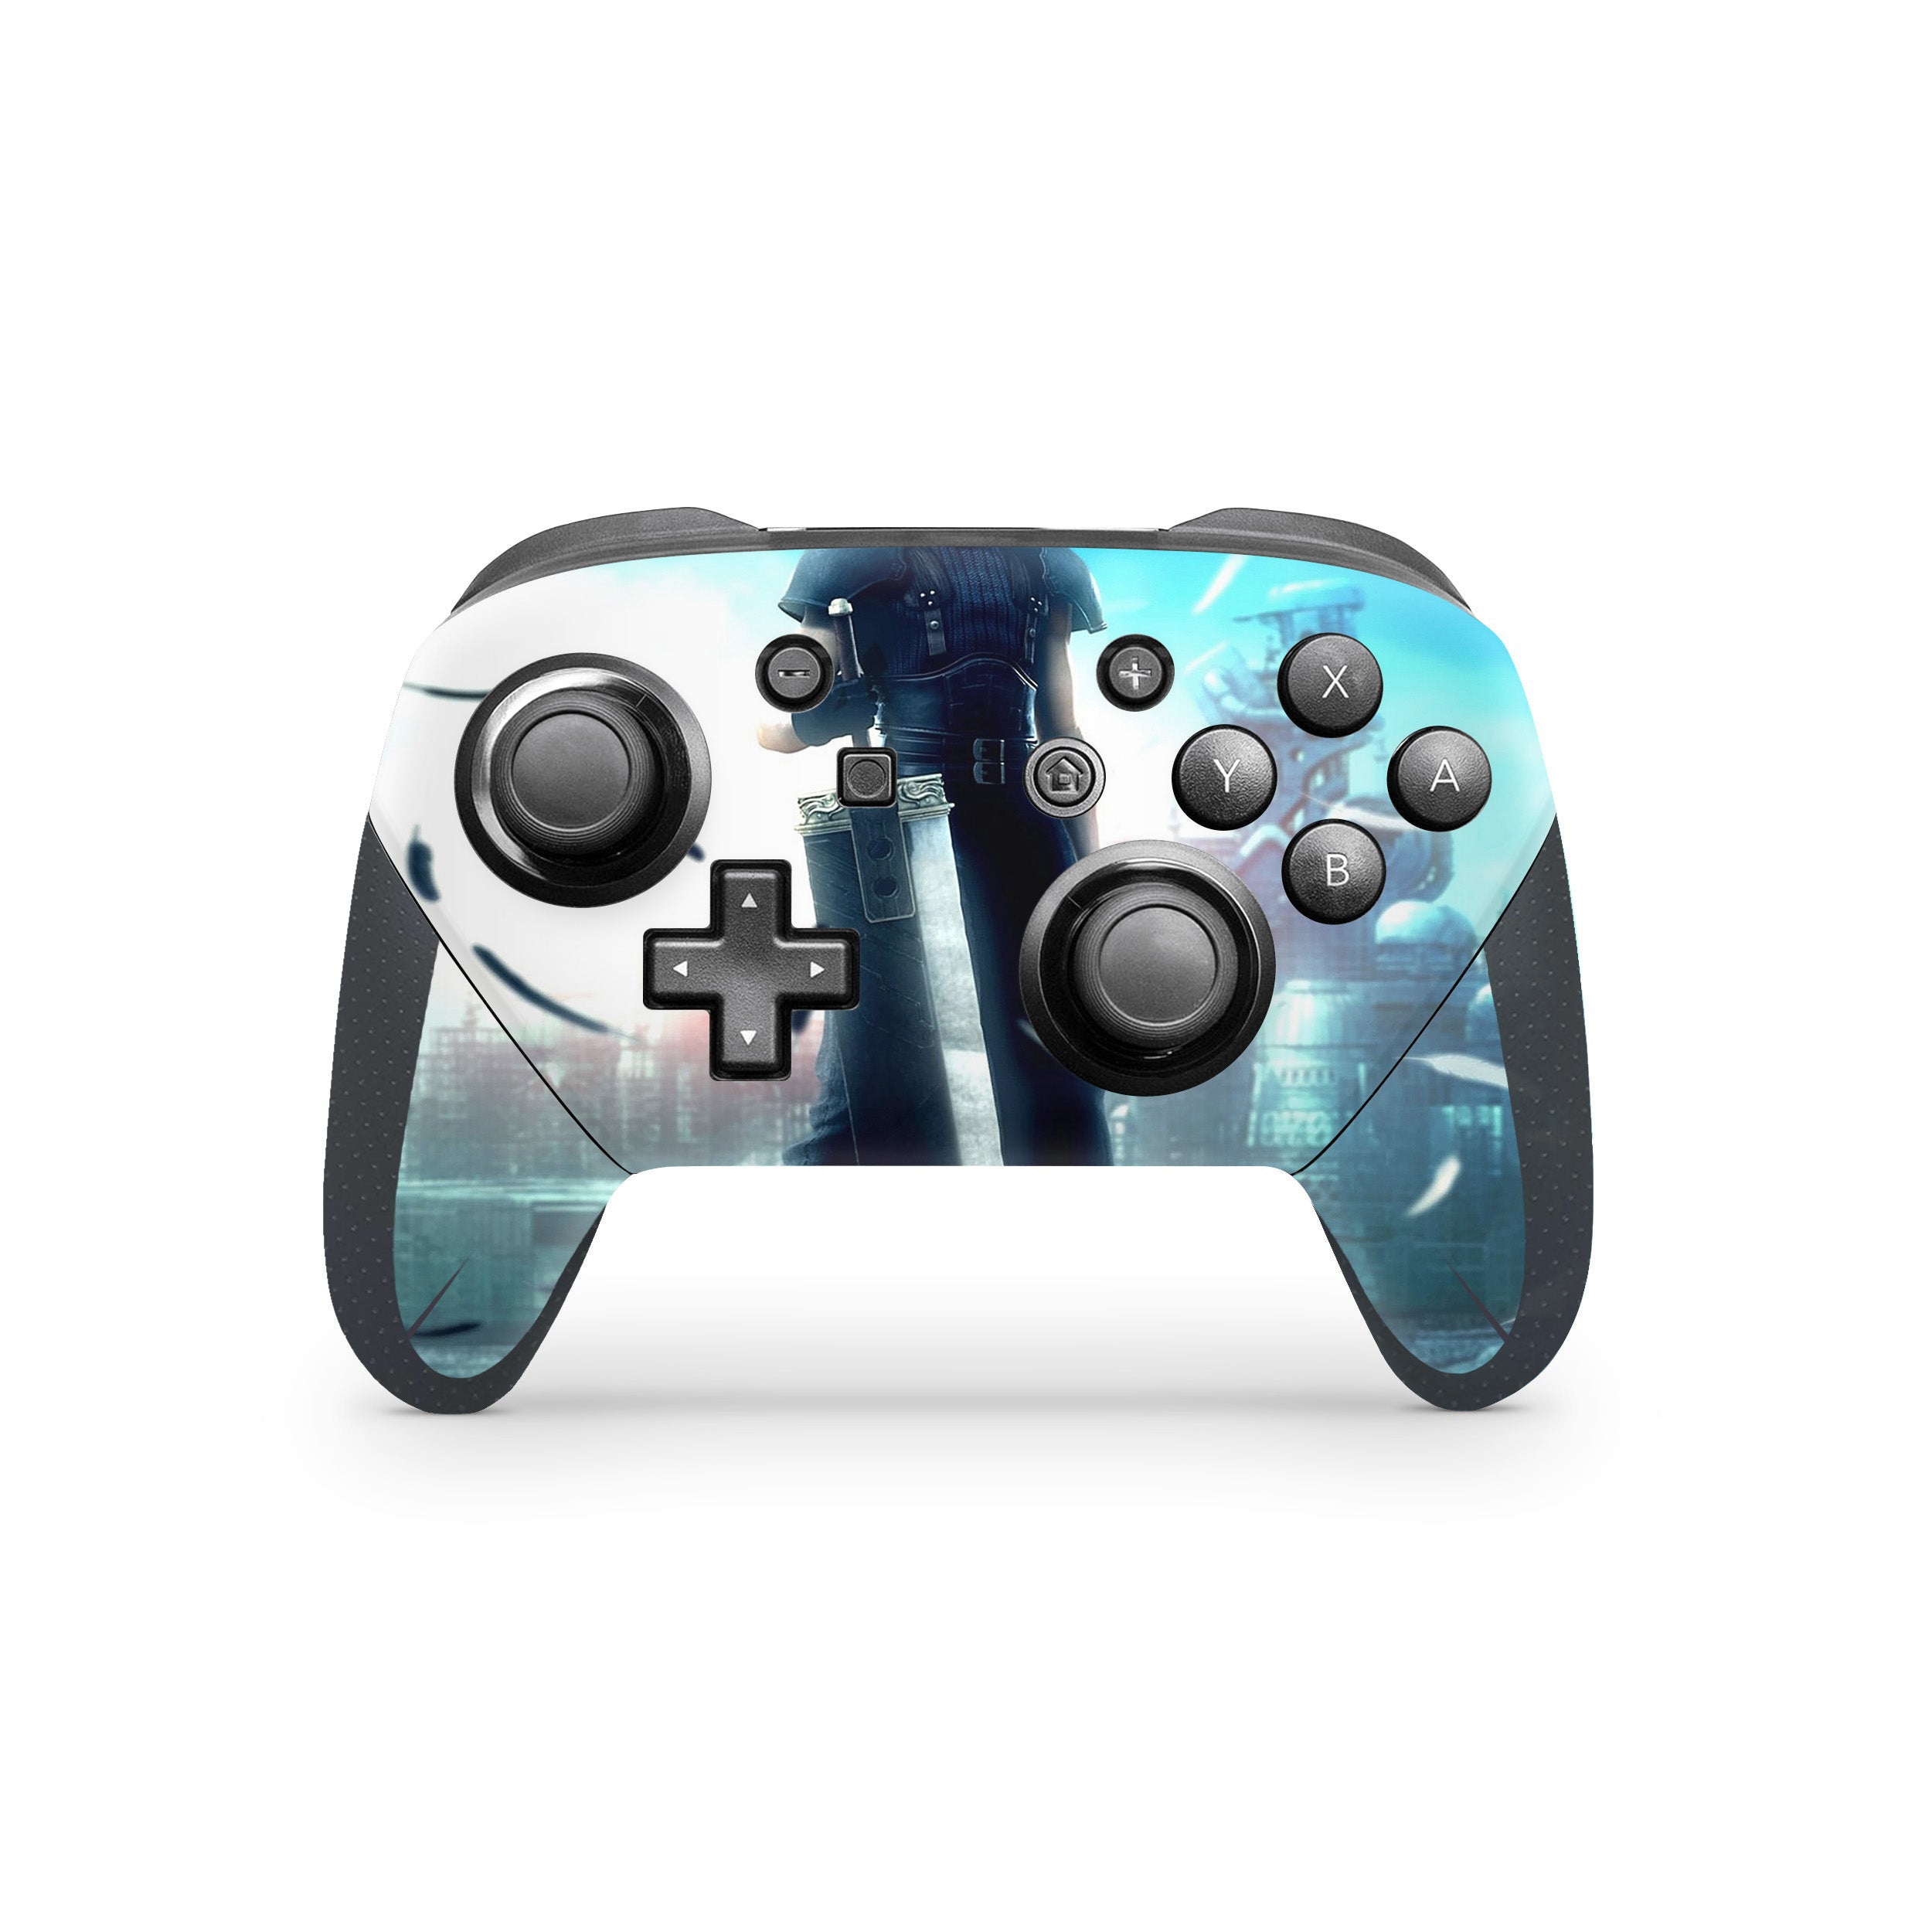 A video game skin featuring a Final Fantasy 7 Cloud And Sephiroth design for the Switch Pro Controller.